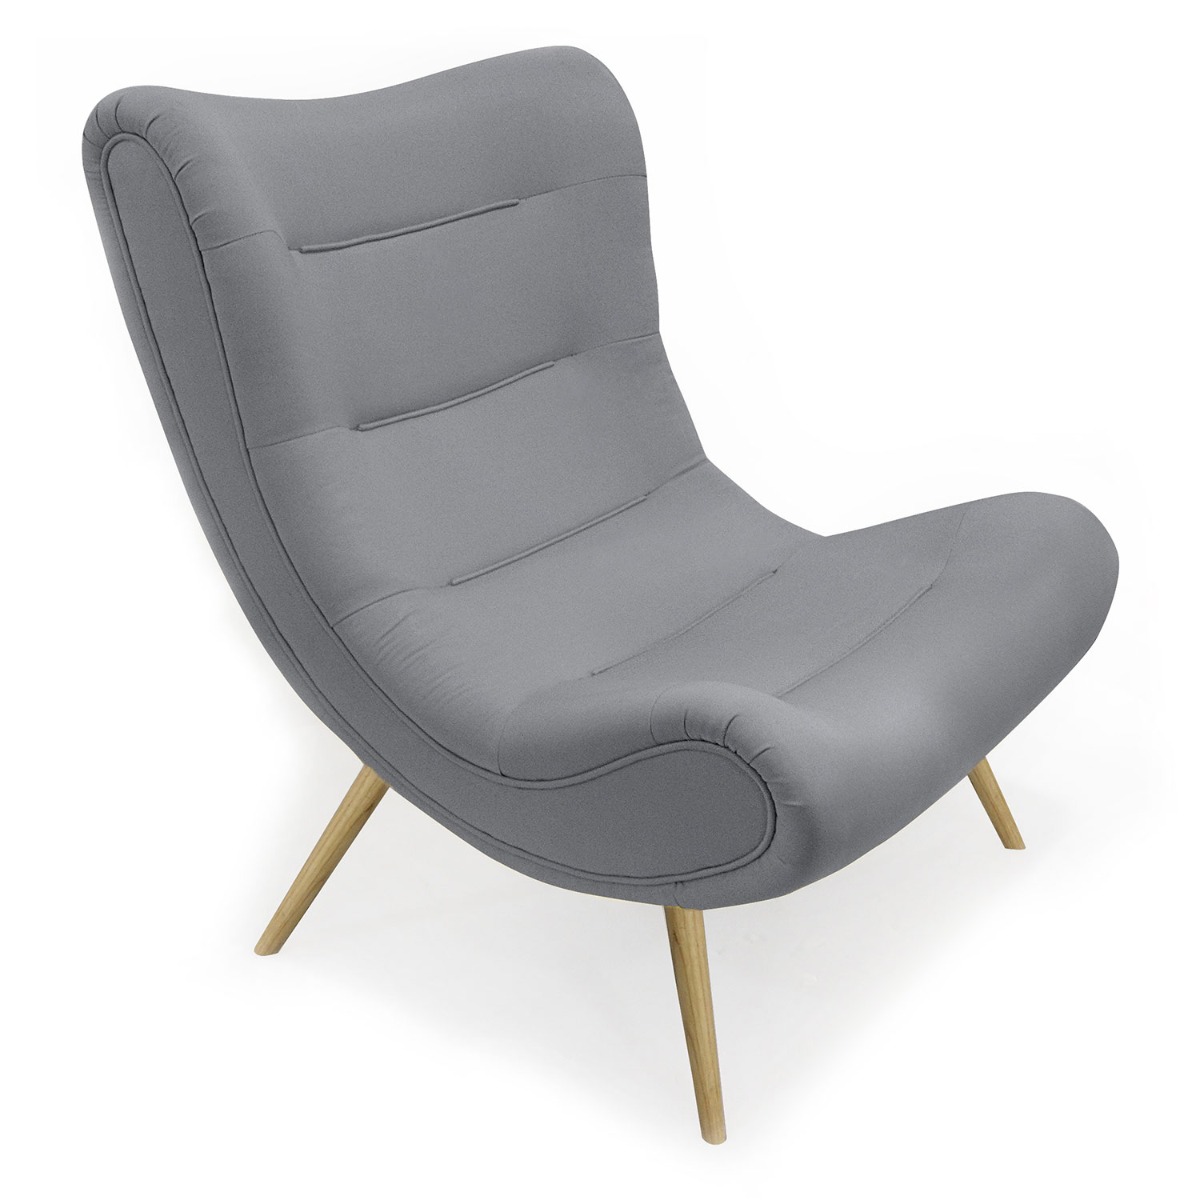 Fauteuil scandinave Romilly Tissu Gris clair